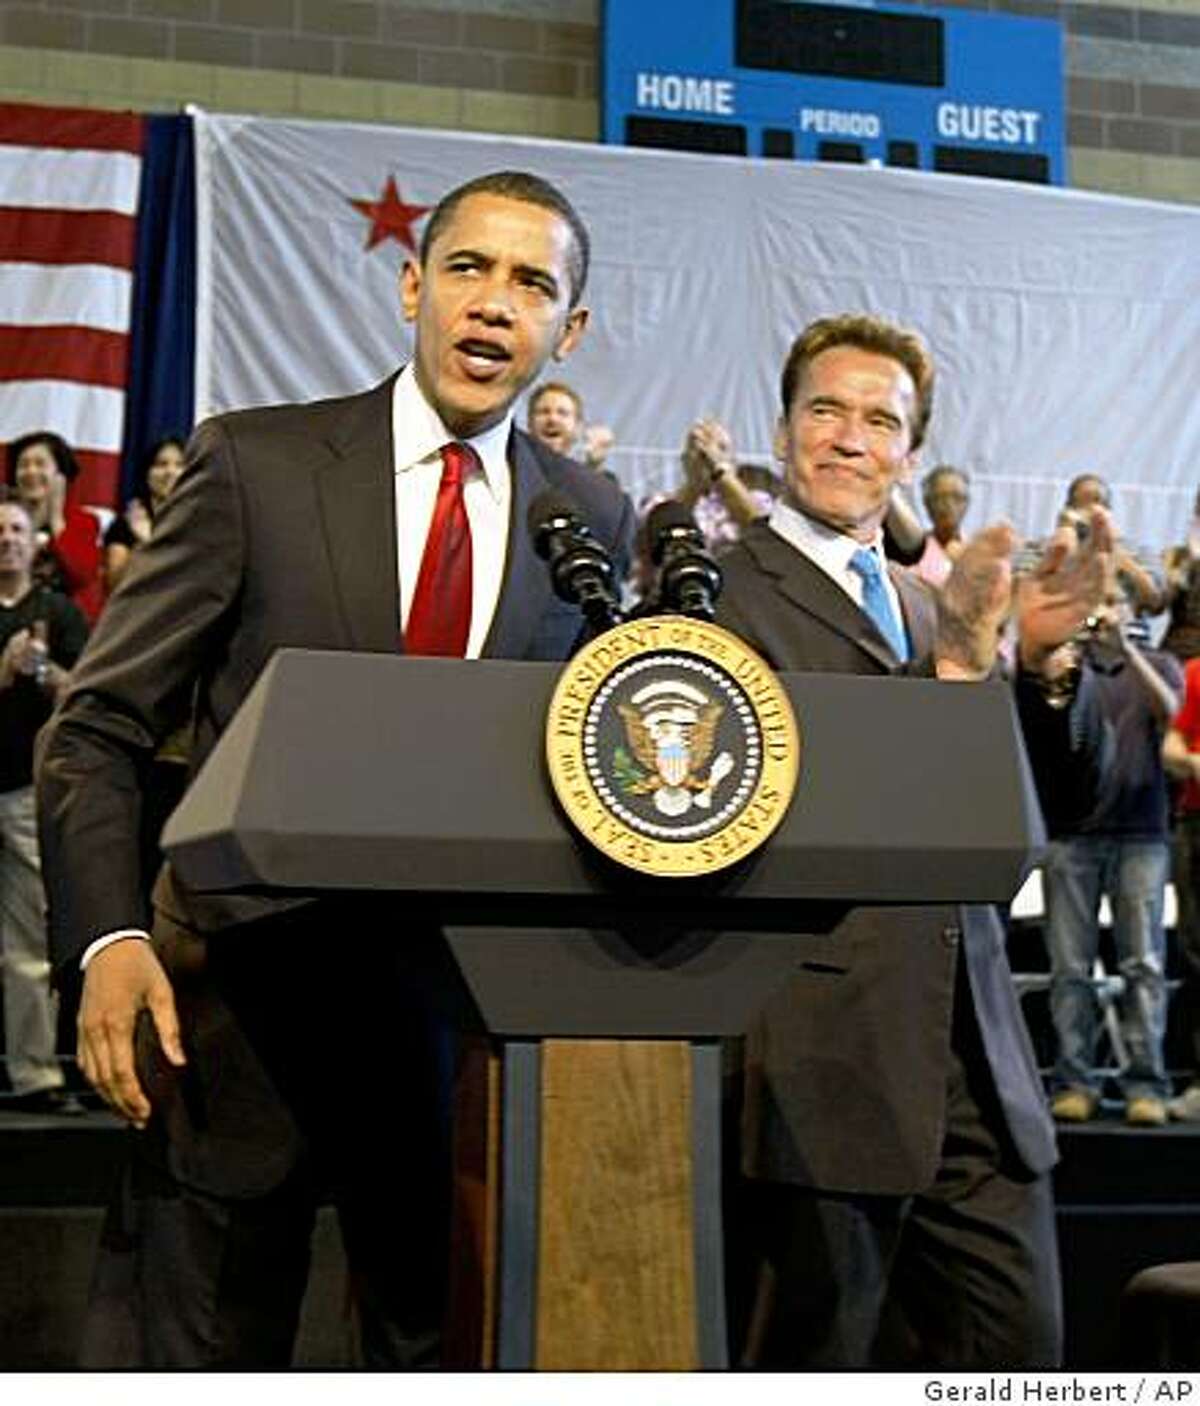 President Barack Obama is applauded by California Gov. Arnold Schwarzenegger upon his arrival at a town hall meeting at the Miguel Contreras Learning Complex in Los Angeles, Thursday, March 19, 2009. (AP Photo/Gerald Herbert)